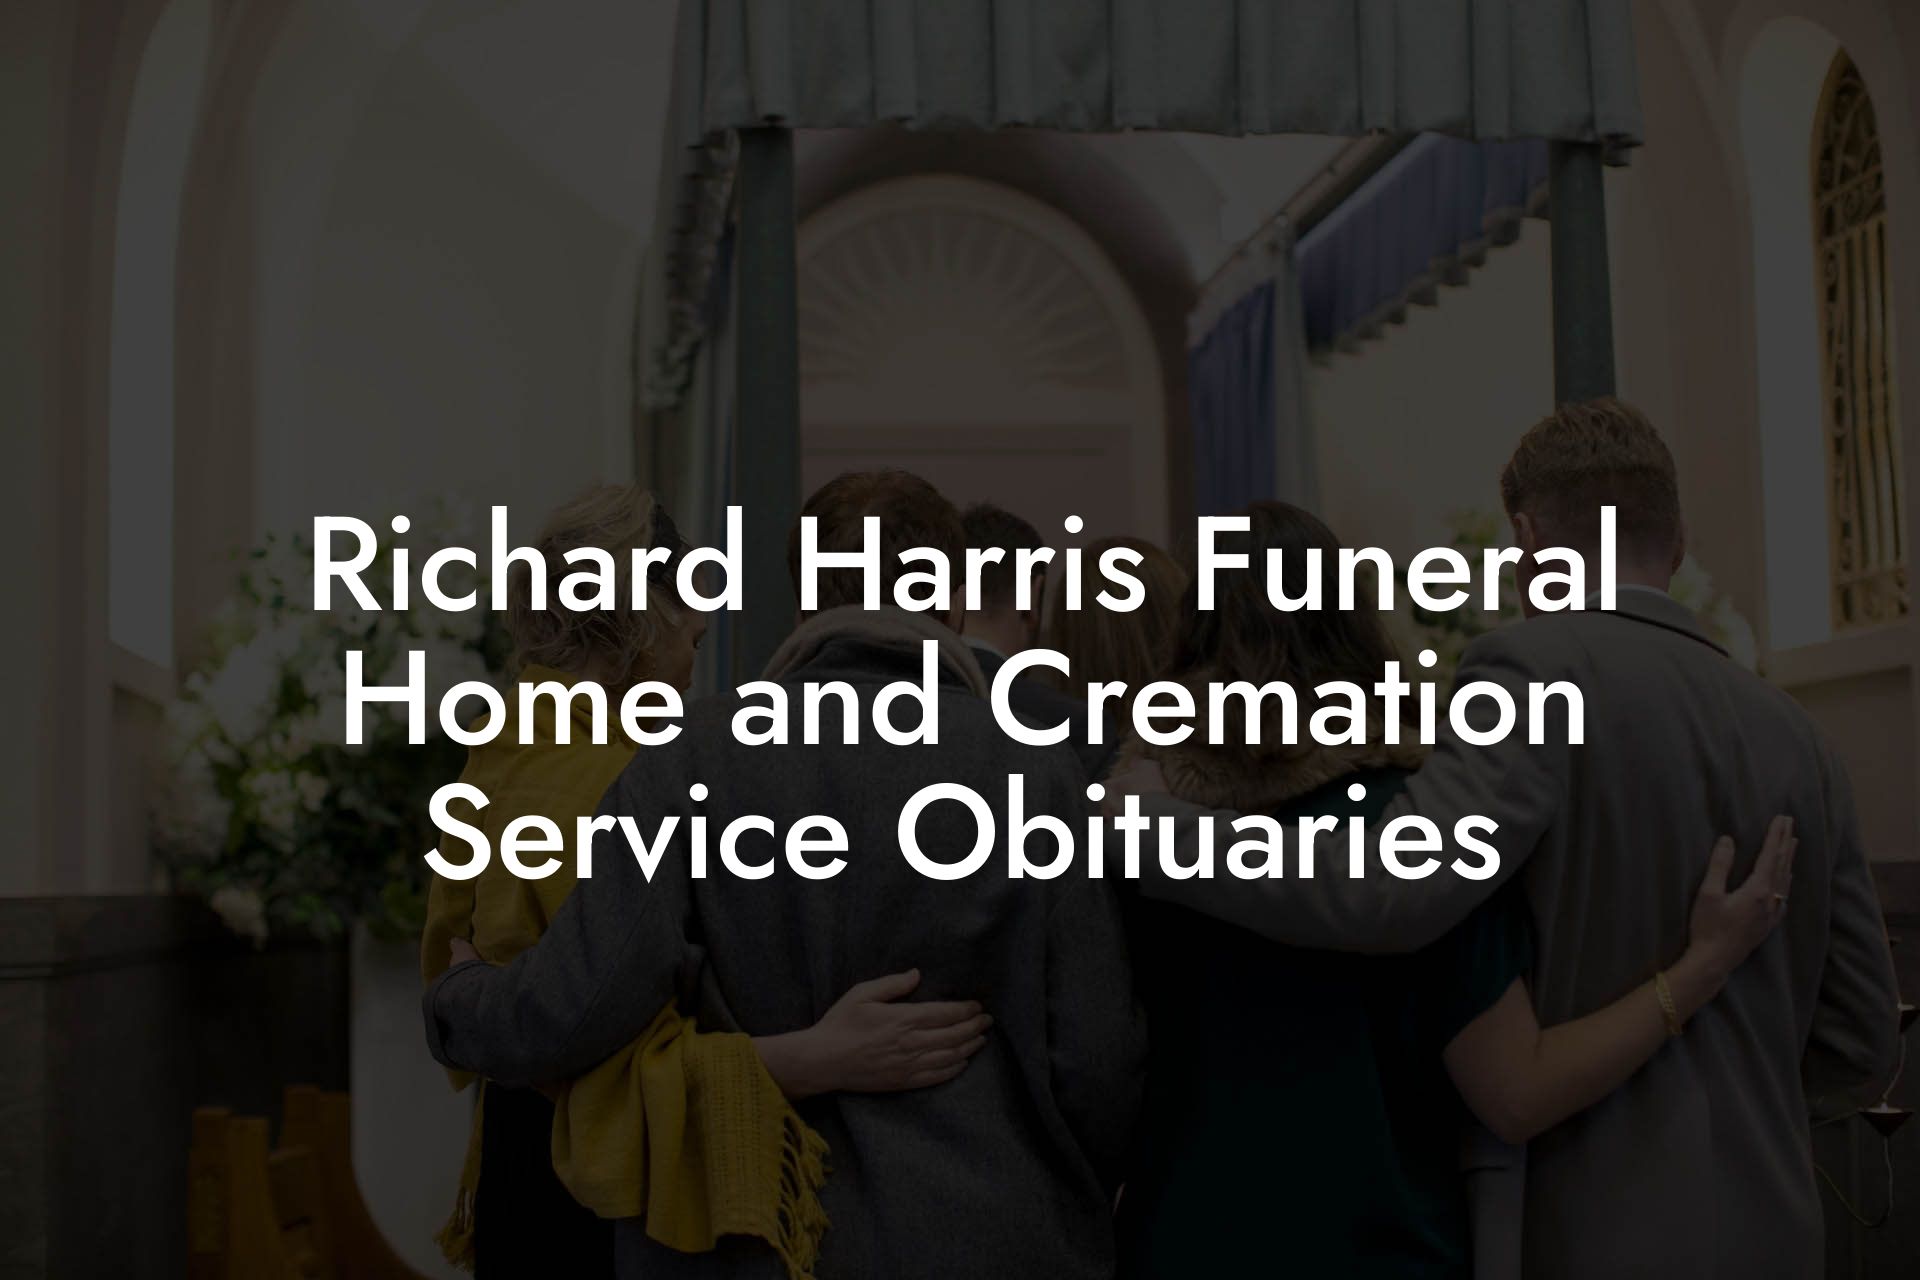 Richard Harris Funeral Home and Cremation Service Obituaries